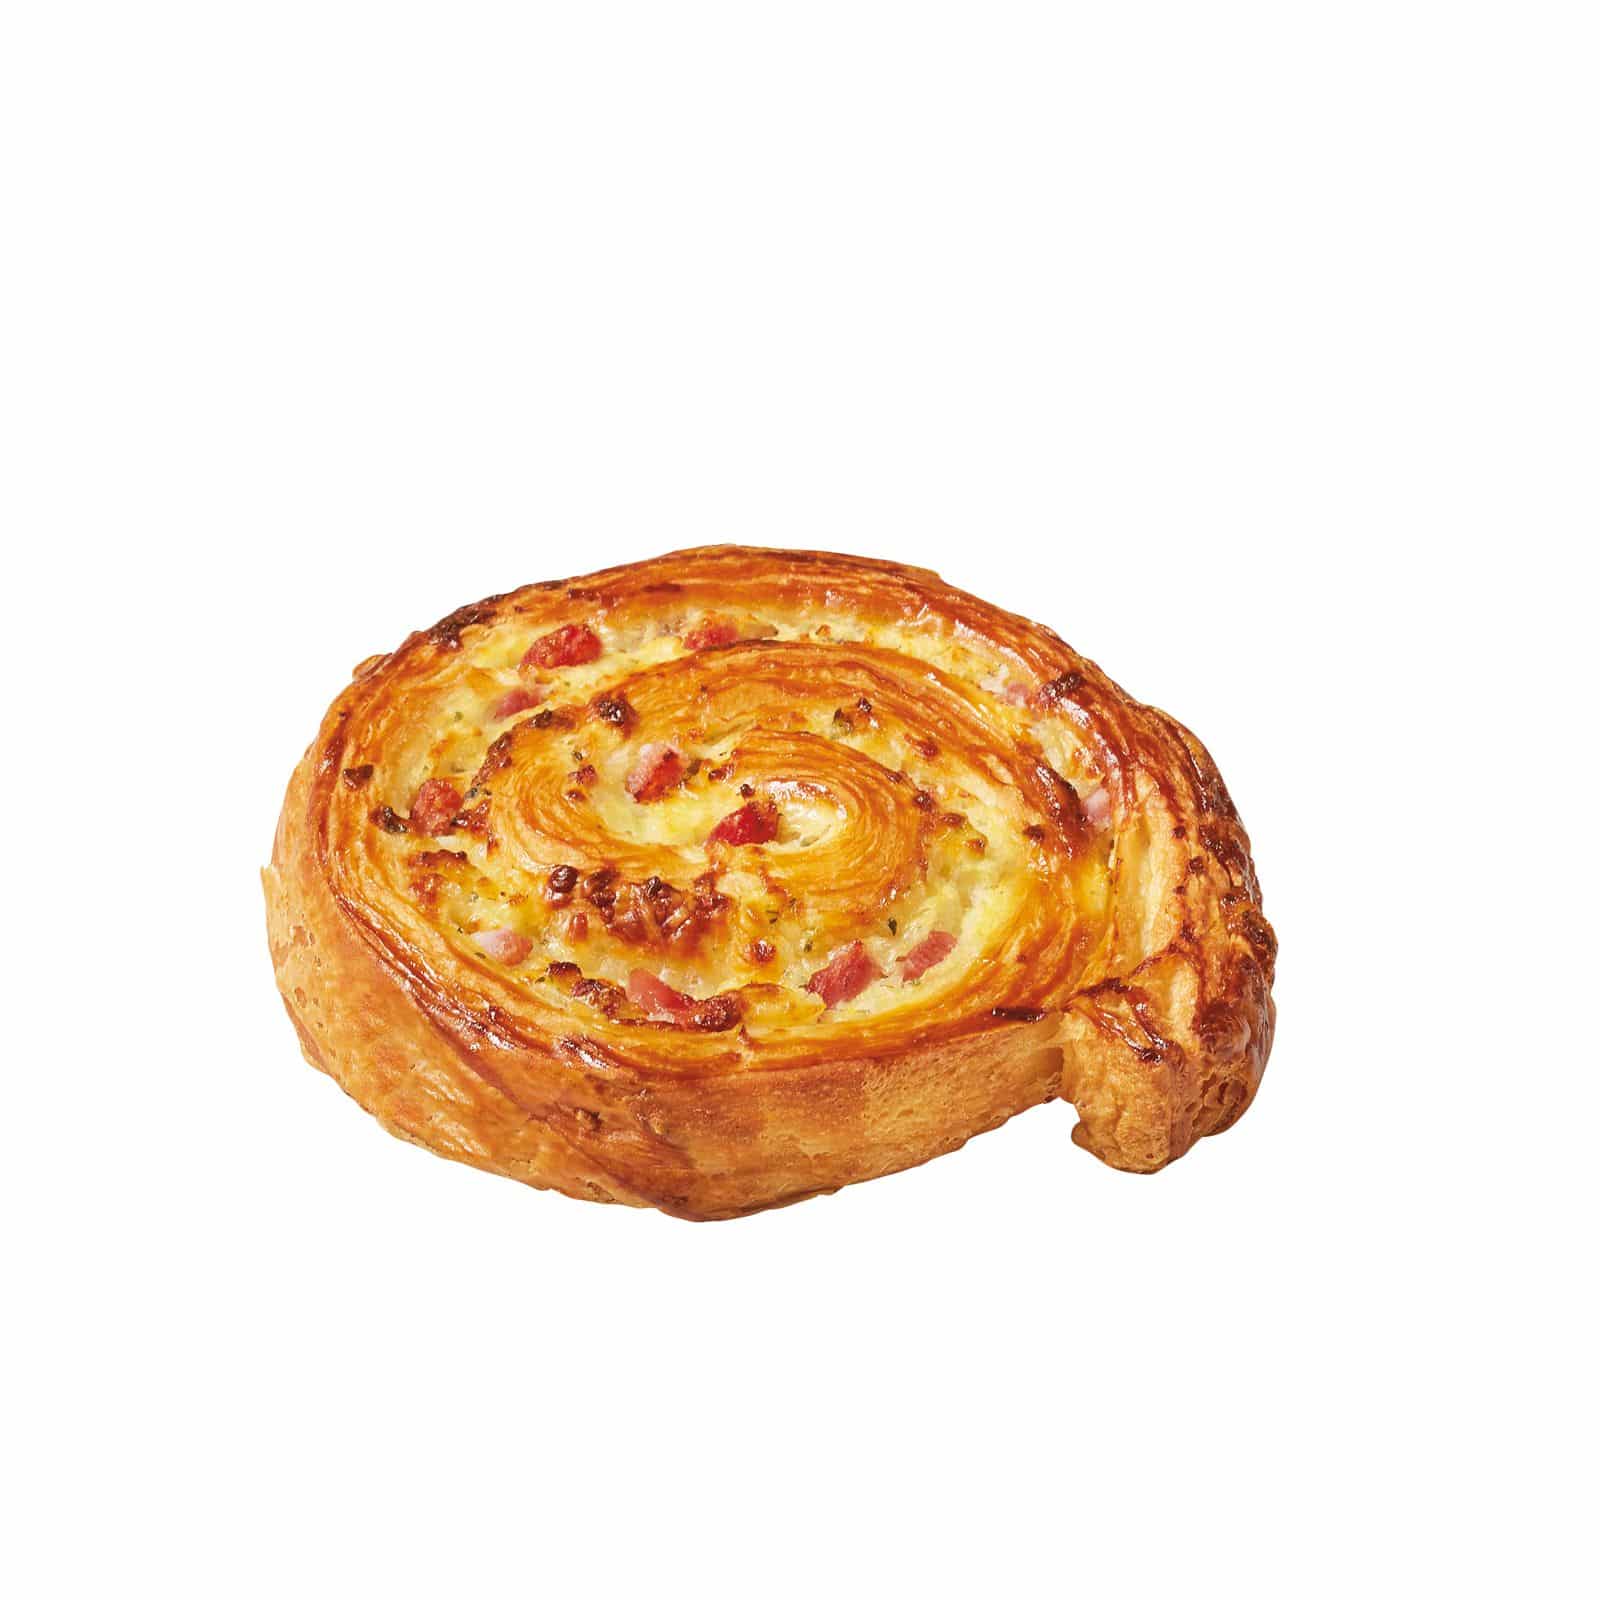 33123-roule-jambon-fromage-120g.tif-1600px (1)